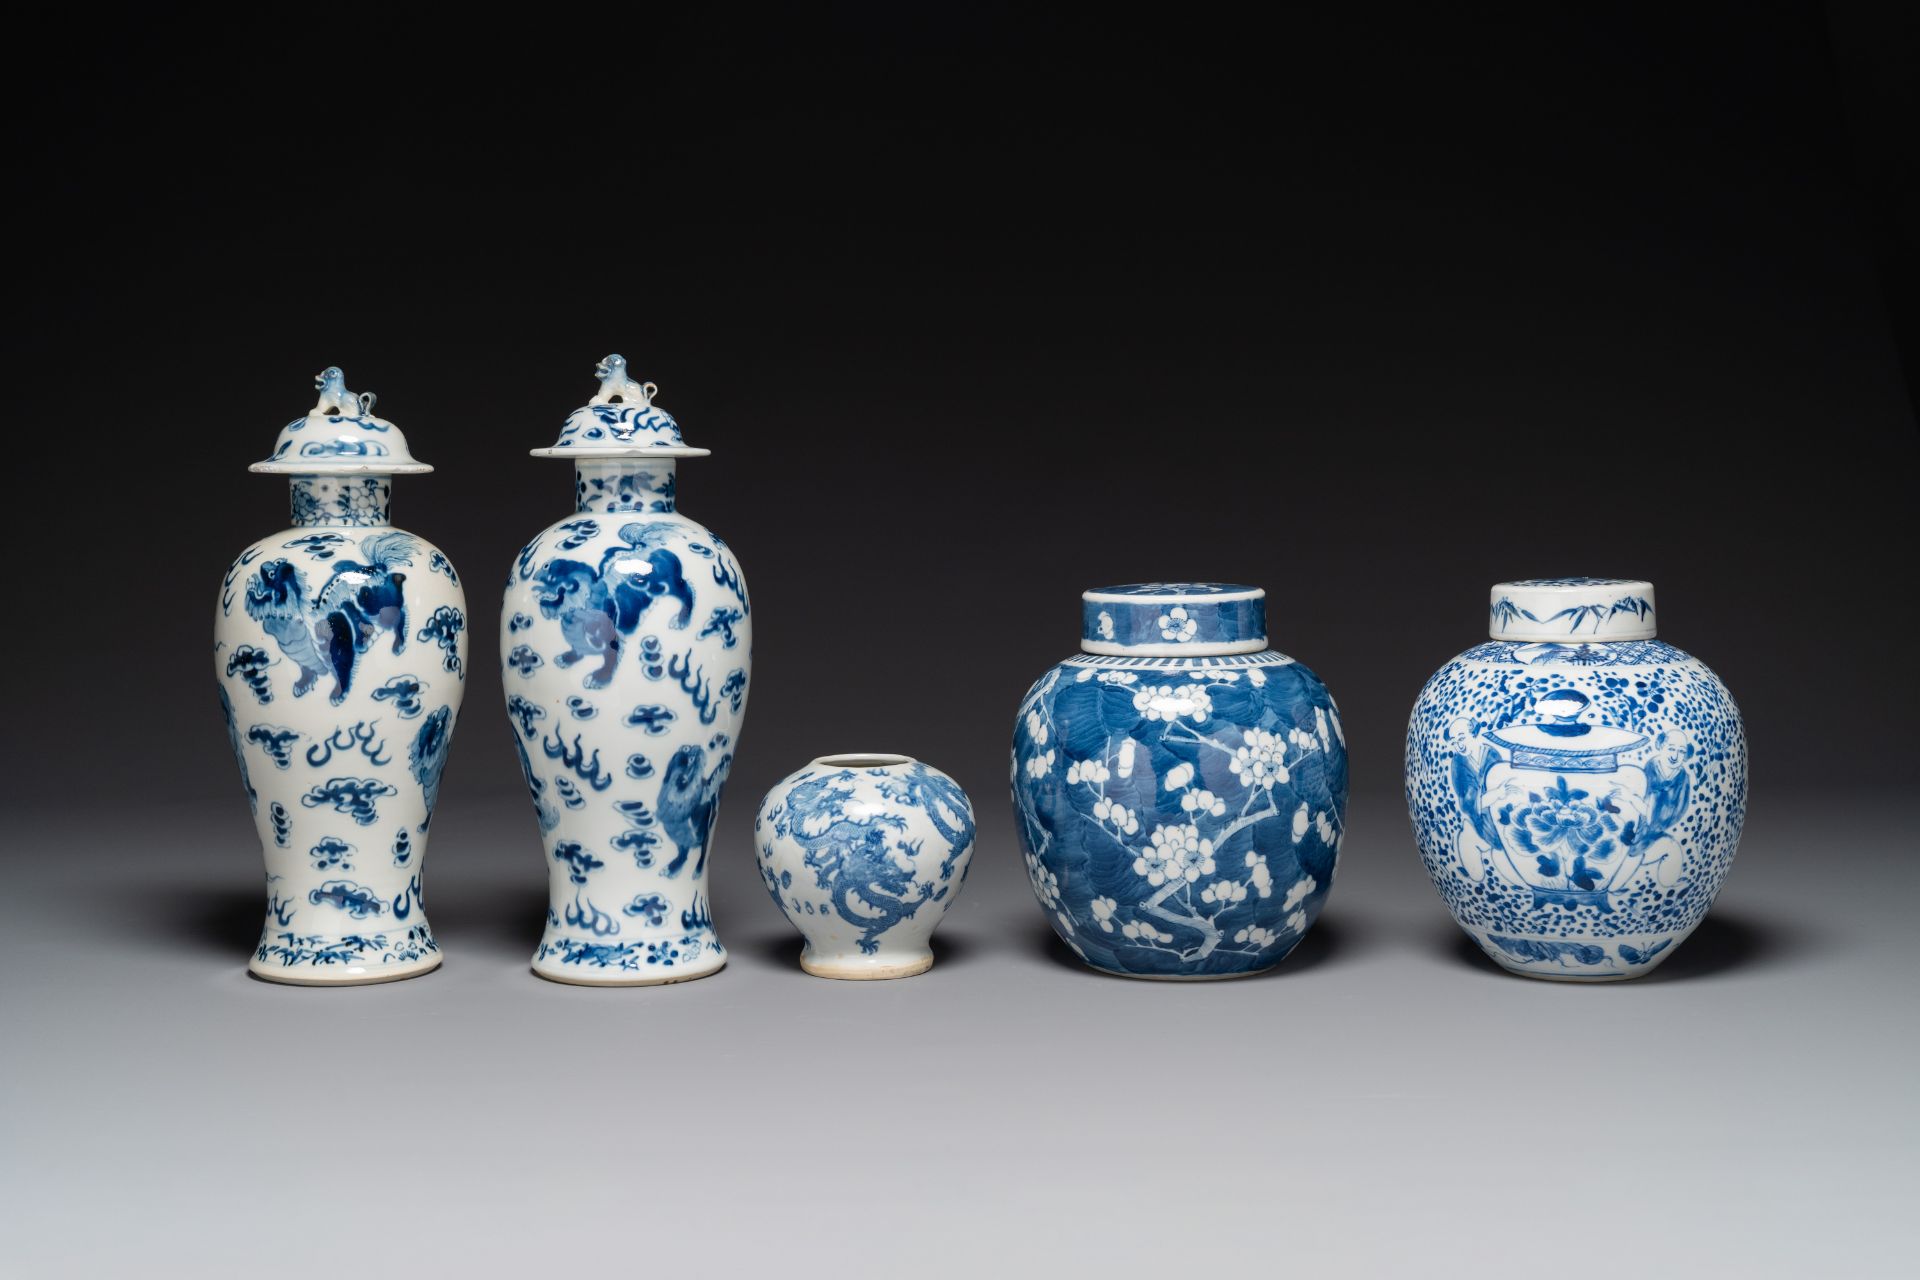 A pair of Chinese blue and white covered vases and three jars, 19th C. - Image 2 of 6